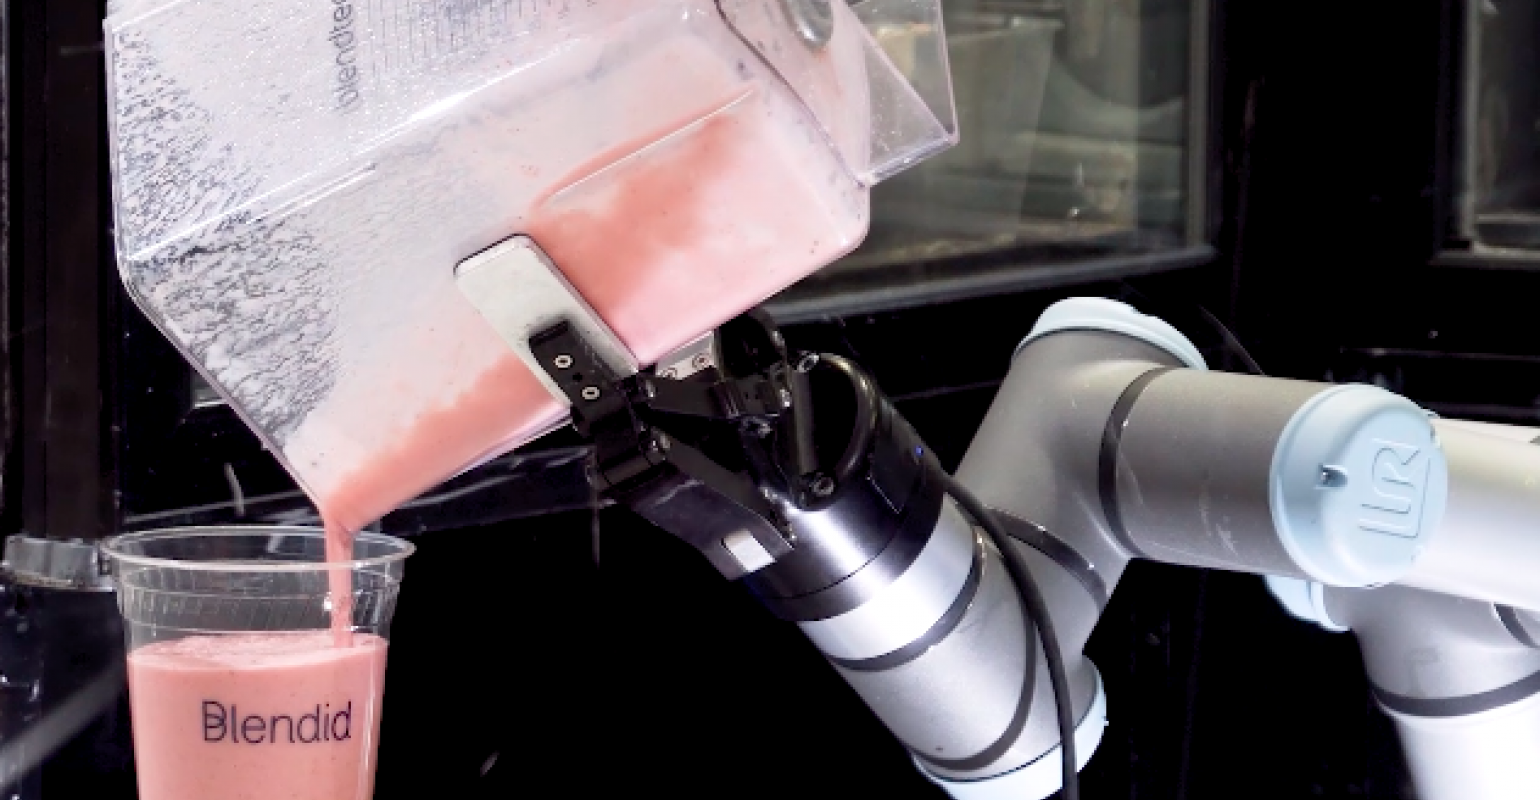 Meet SF's New, Giant, Smoothie Making Robot